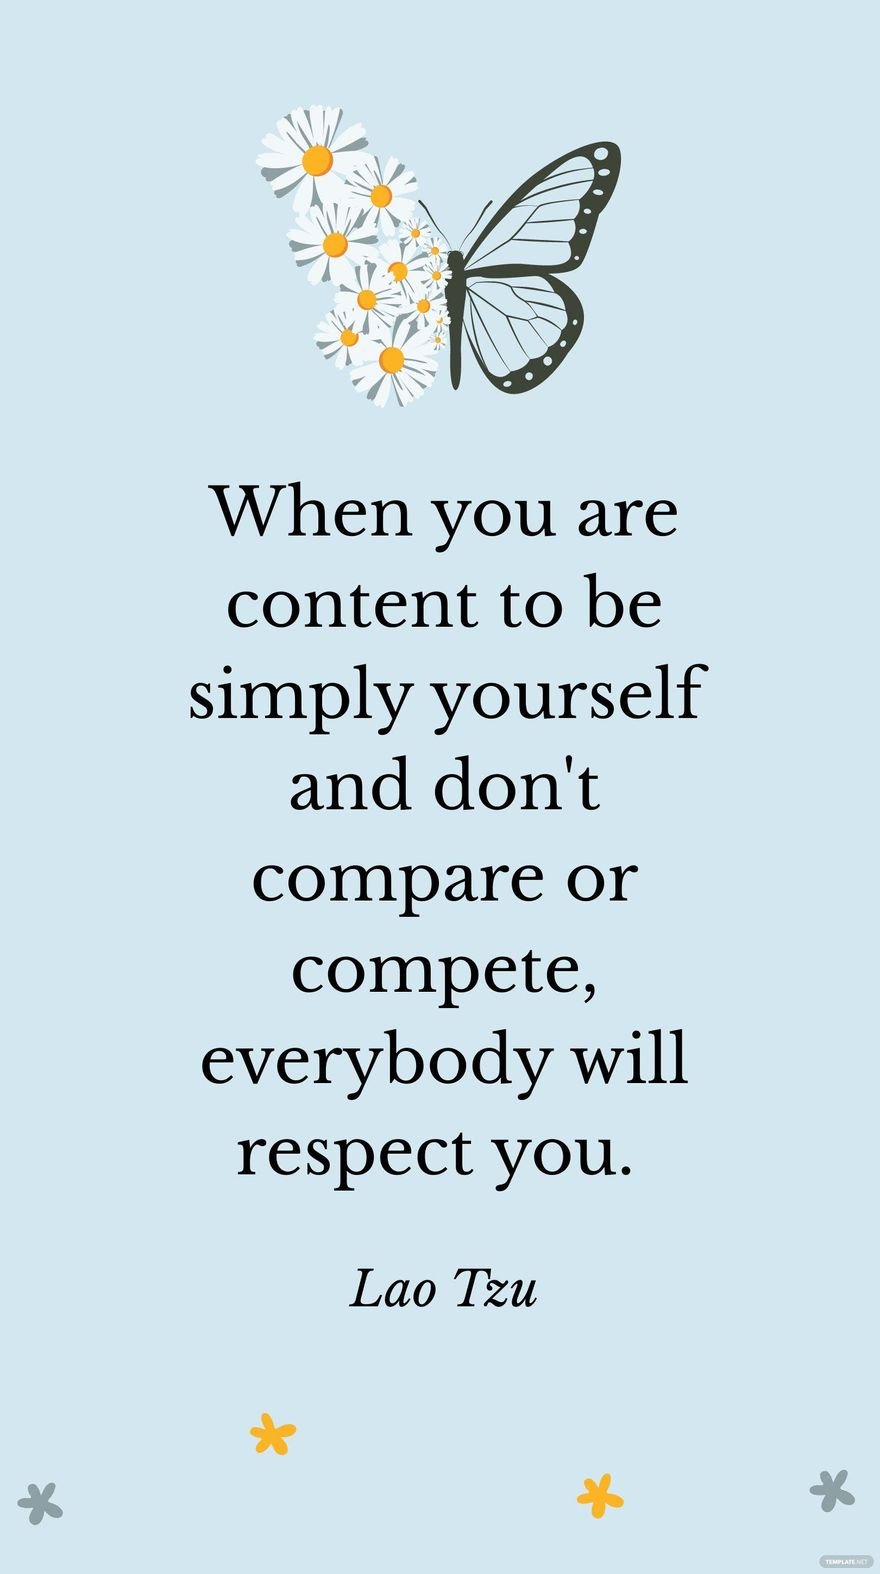 Lao Tzu - When you are content to be simply yourself and don't compare or compete, everybody will respect you.